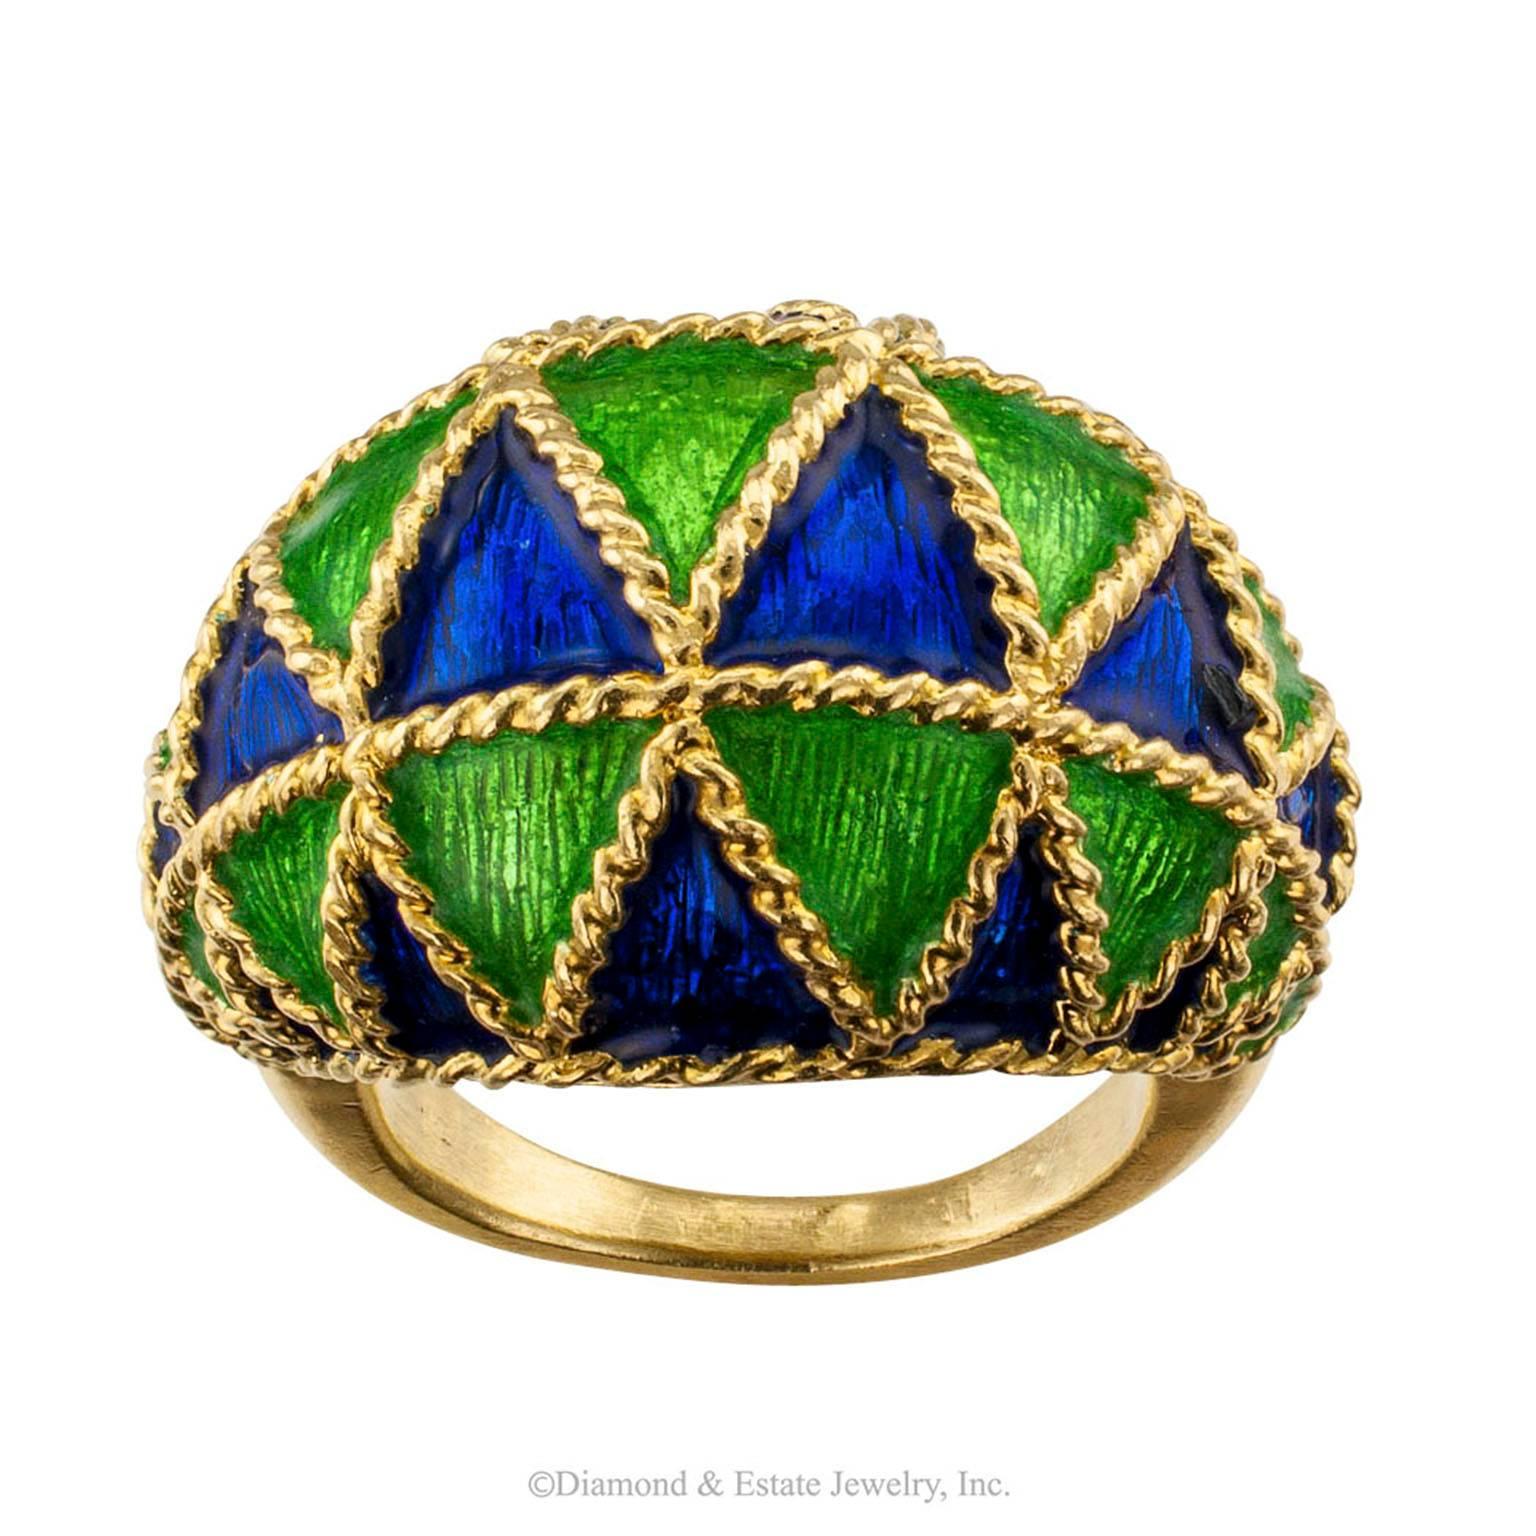 1970s Domed Ring Blue Green Enamel Gold

Domed ring 1970s blue and green enamel crafted in 18-karat gold.  Attractive rows of alternating blue and green enamel triangles bordered with corded gold motifs, graduated on a rising arch across the finger,